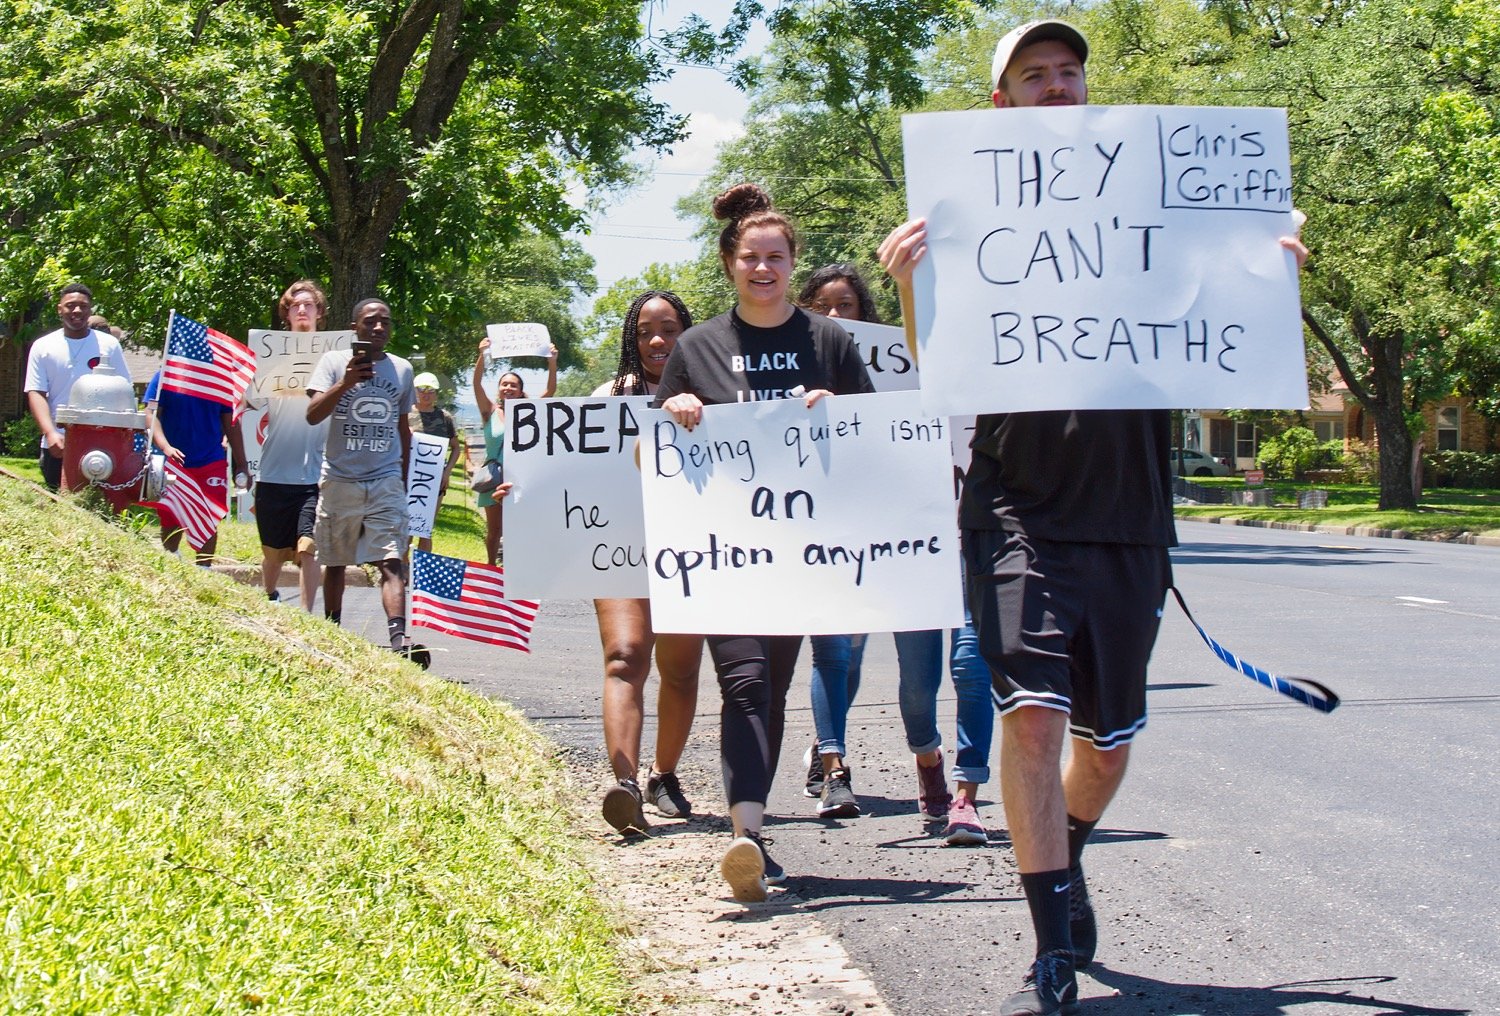 Hunter Barr leads a group of marchers through the streets of Mineola last Thursday to bring attention to oppression of black citizens. Another rally is planned Thursday at 5 p.m.